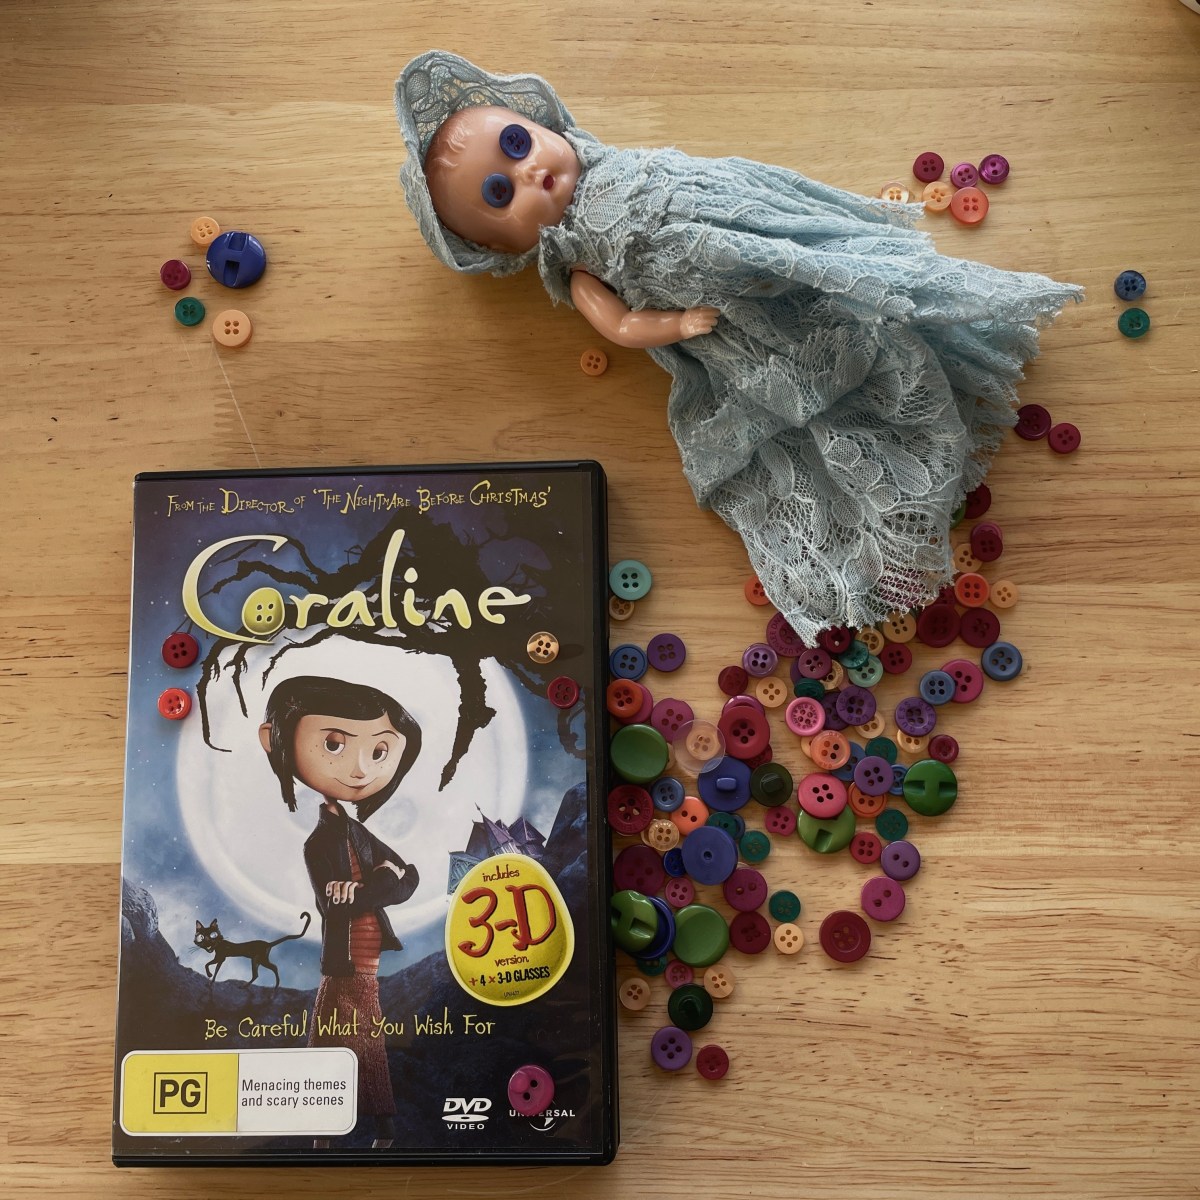 A Coraline DVD lies on a wood bench, on the cover is an animated girl with blue hair and her arms folded. Colourful buttons are spilling out of the DVD case and underneath a small doll with a blue dress and blue buttons for eyes.